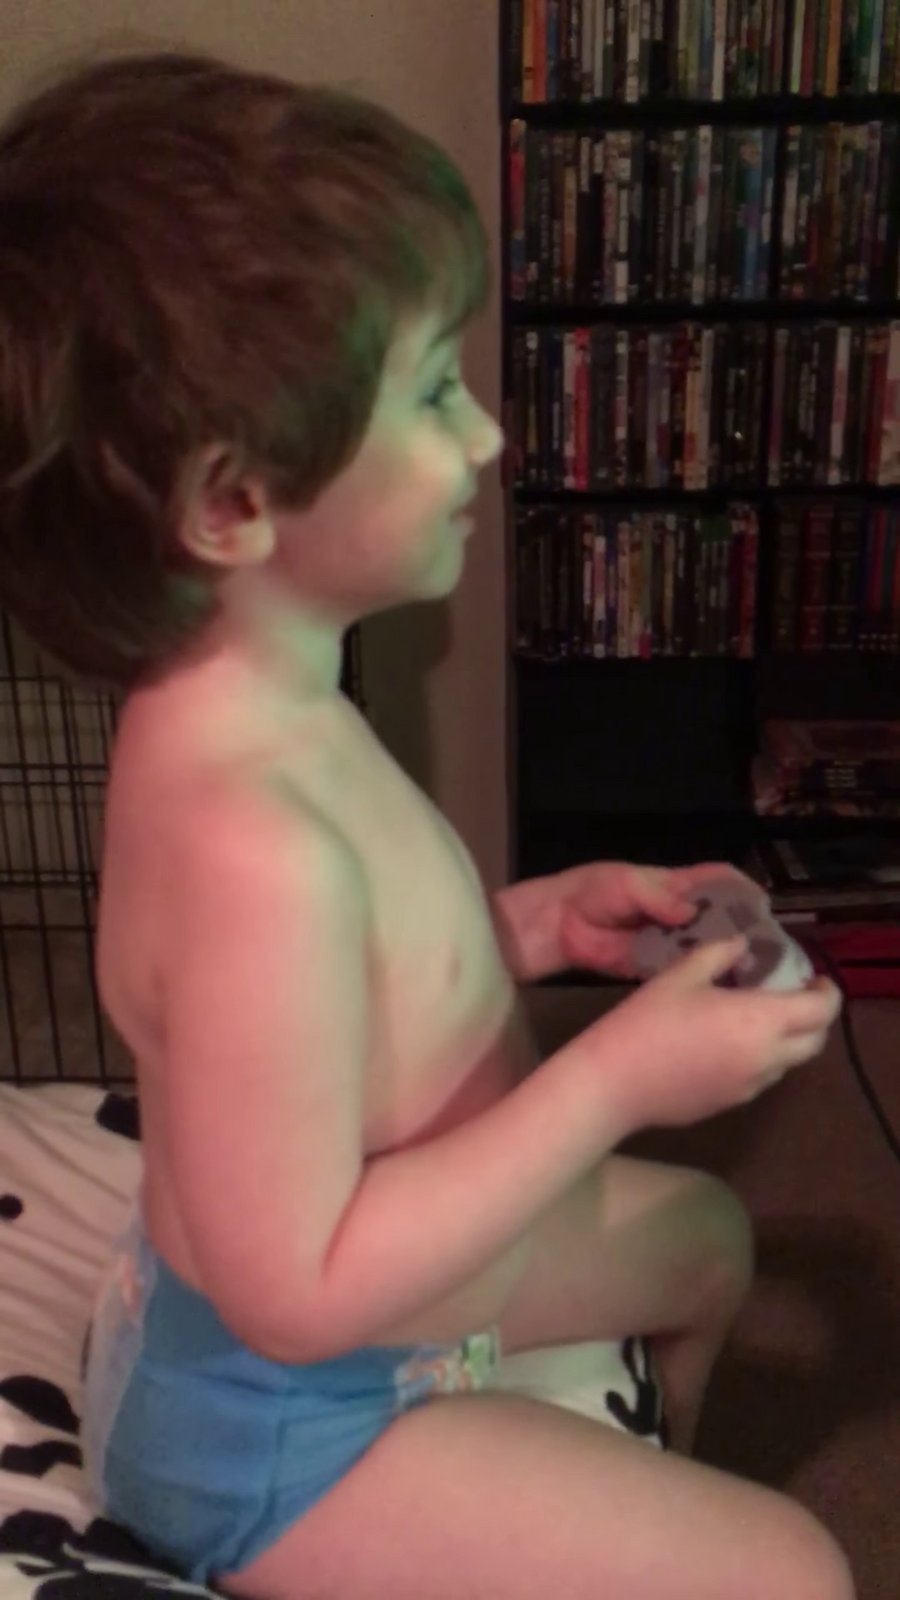 Pull Ups diapers boy gamers (1).png